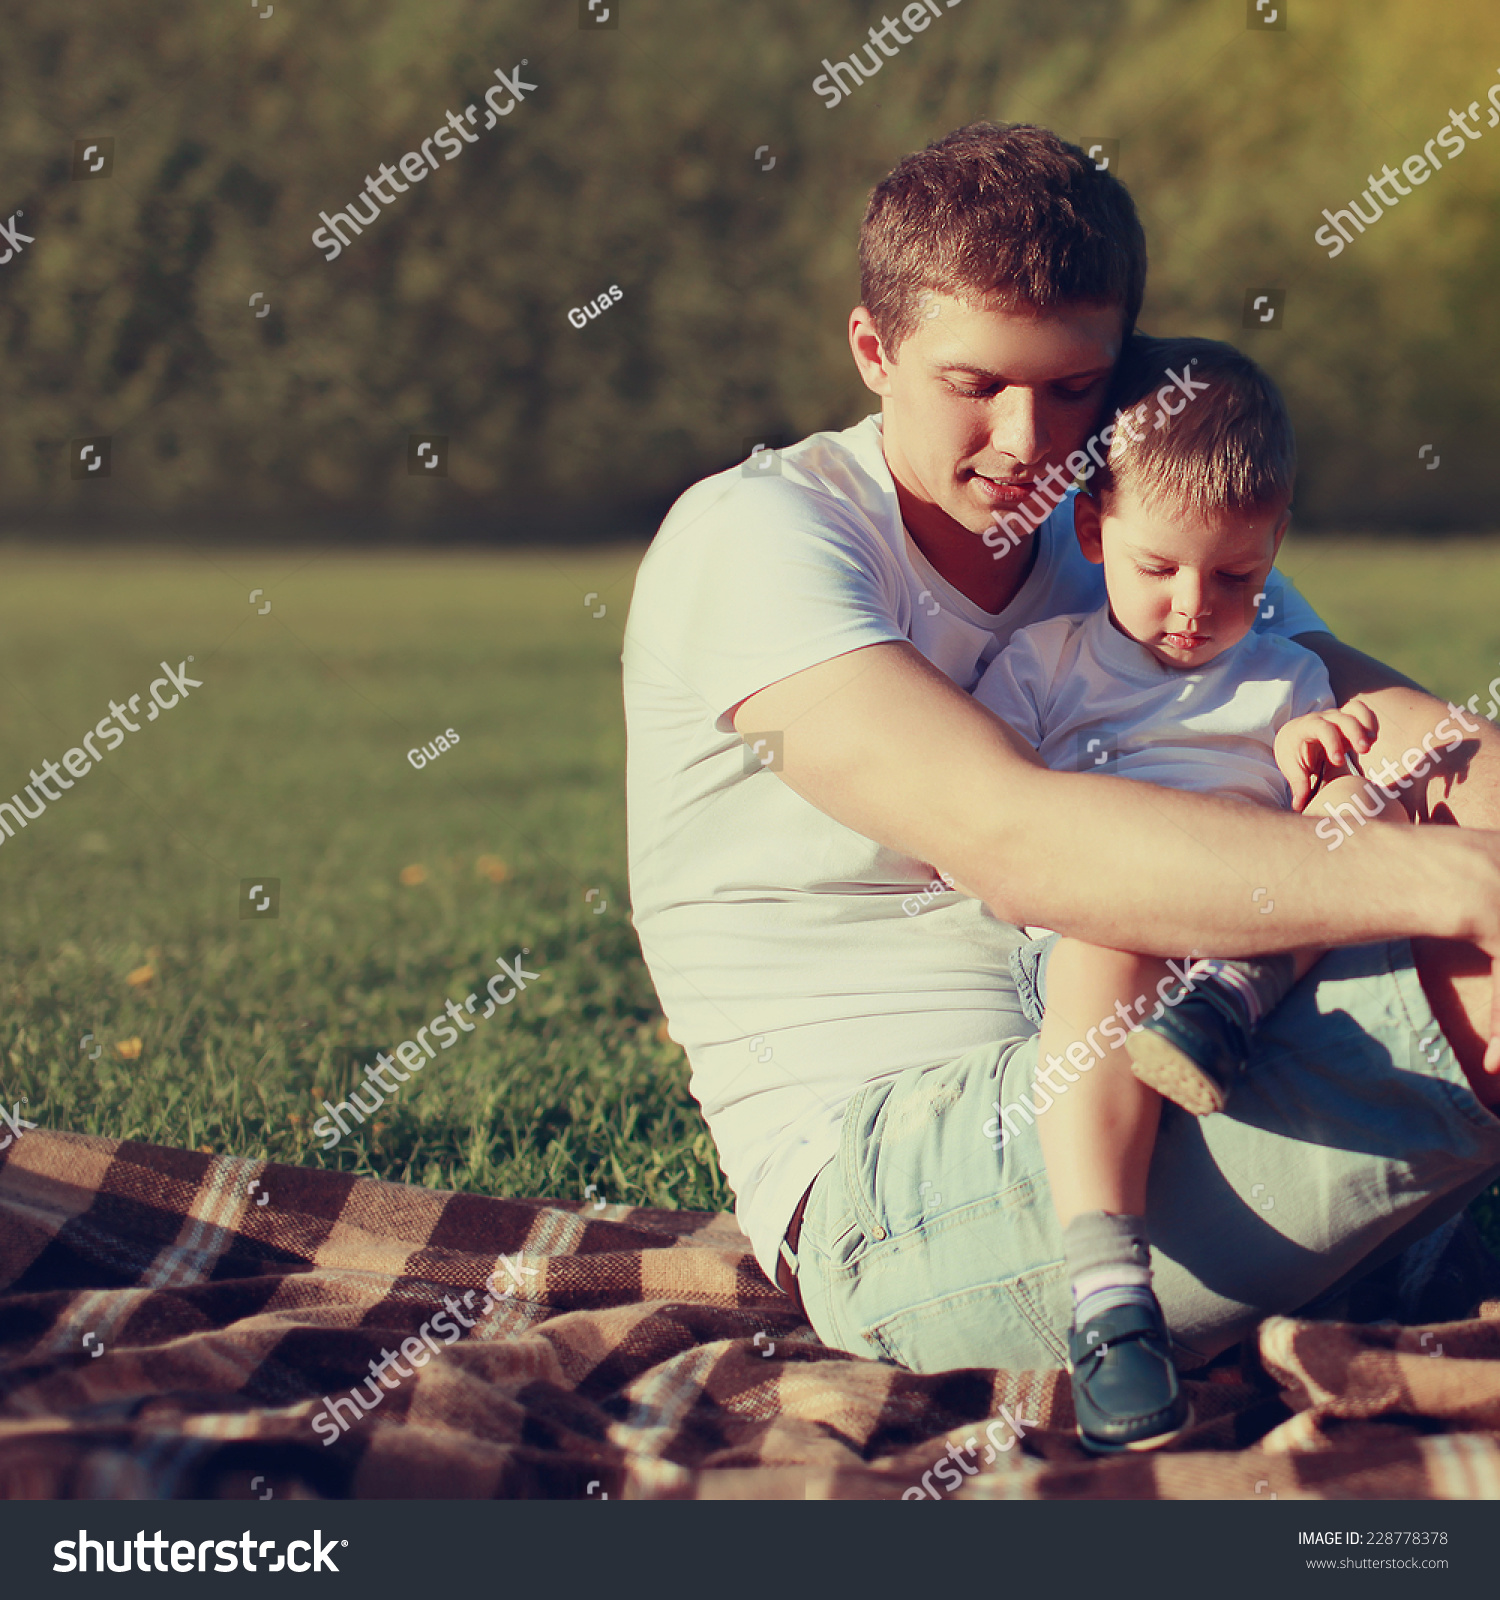 Lifestyle Photo Lovely Father Son Together Stock Photo 228778378 ...